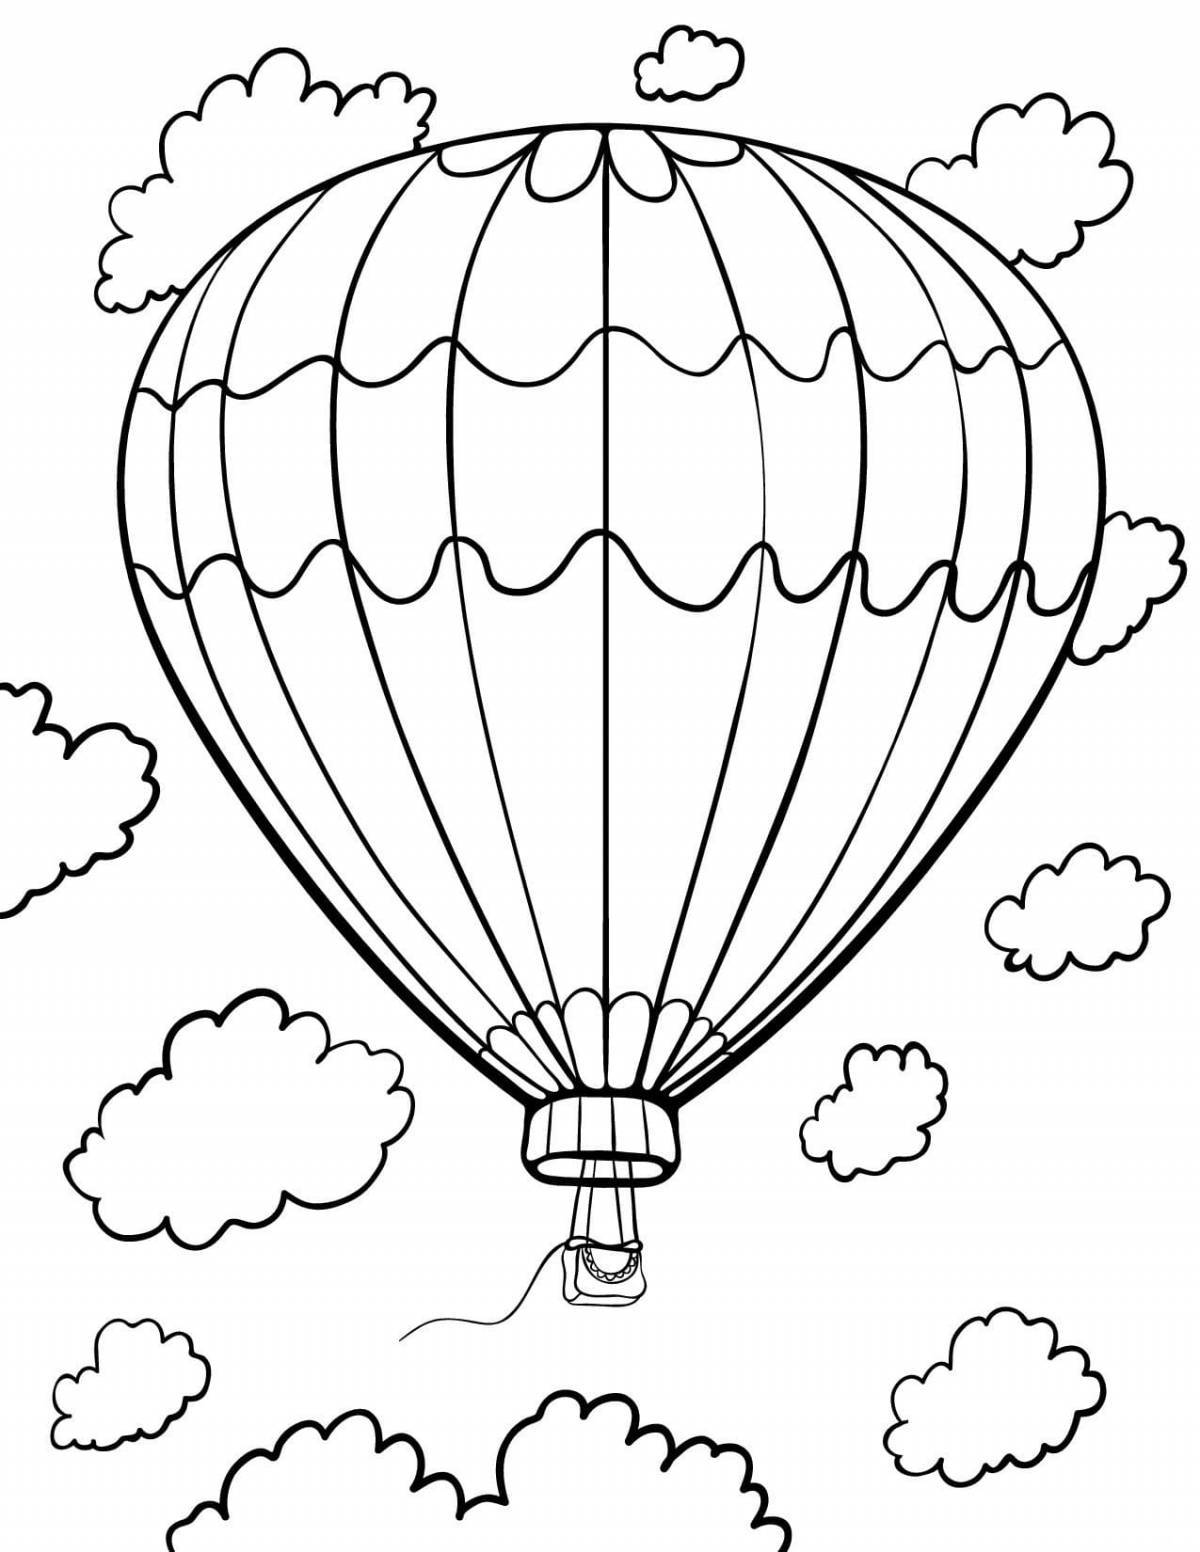 Holiday coloring book with balloons